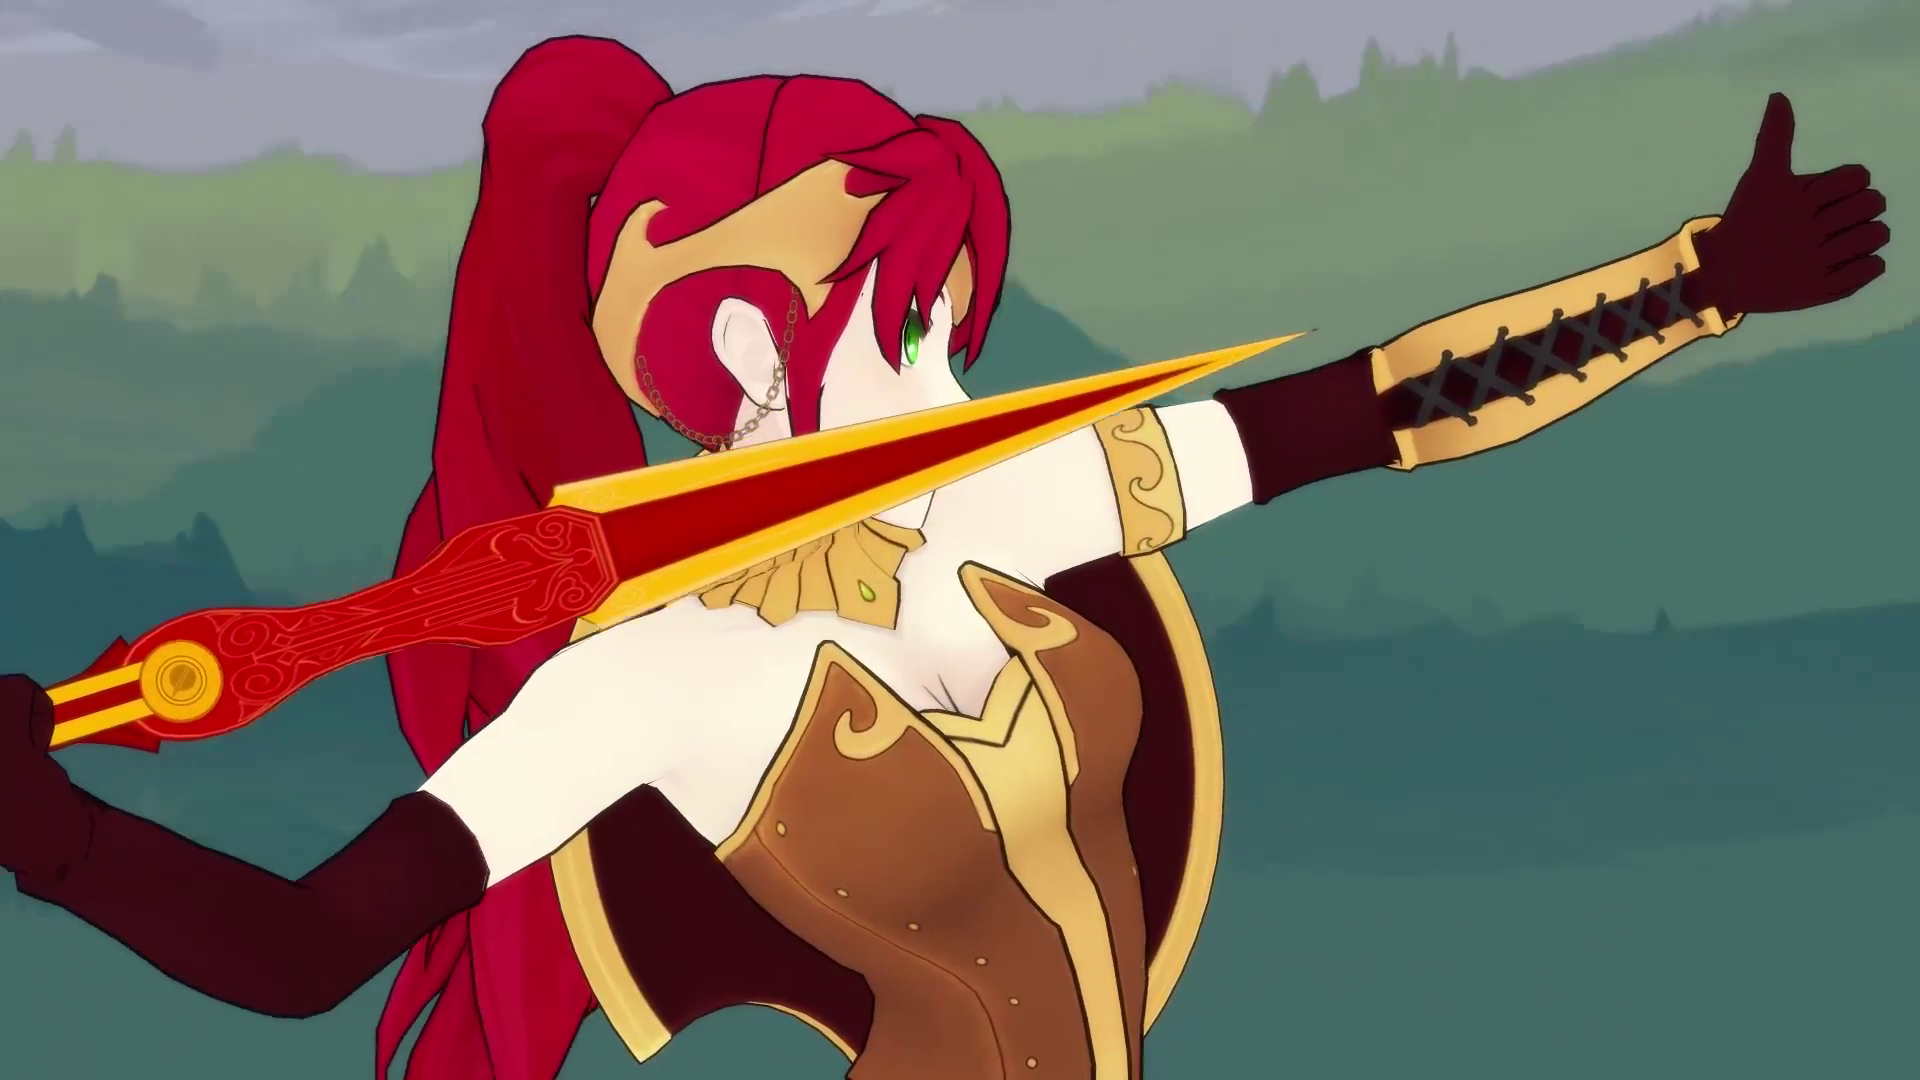 1920x1080 5 Things You Probably Didn't Know About Pyrrha Nikos | Geeks